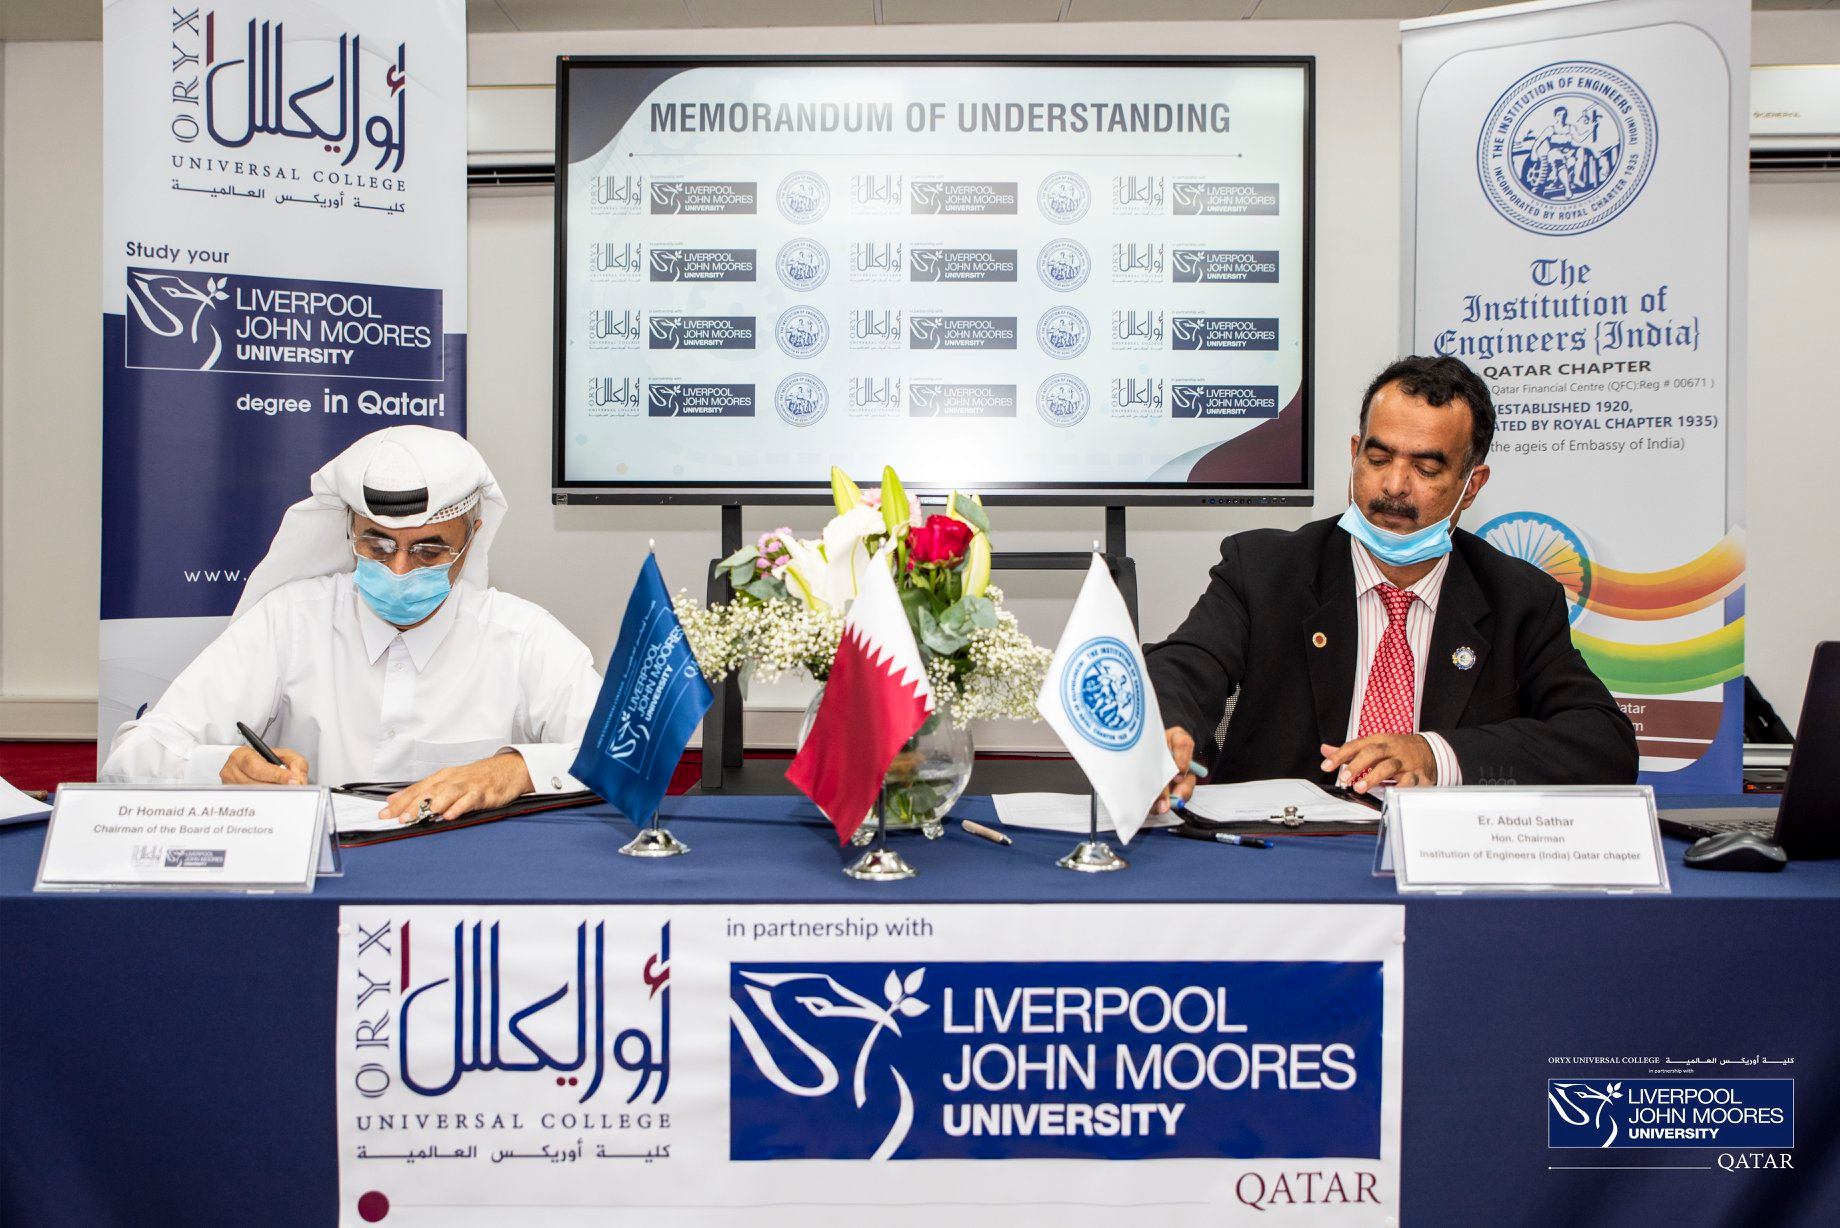 MOU signed between Oryx Universal College, in partnership with Liverpool John Moores University, and